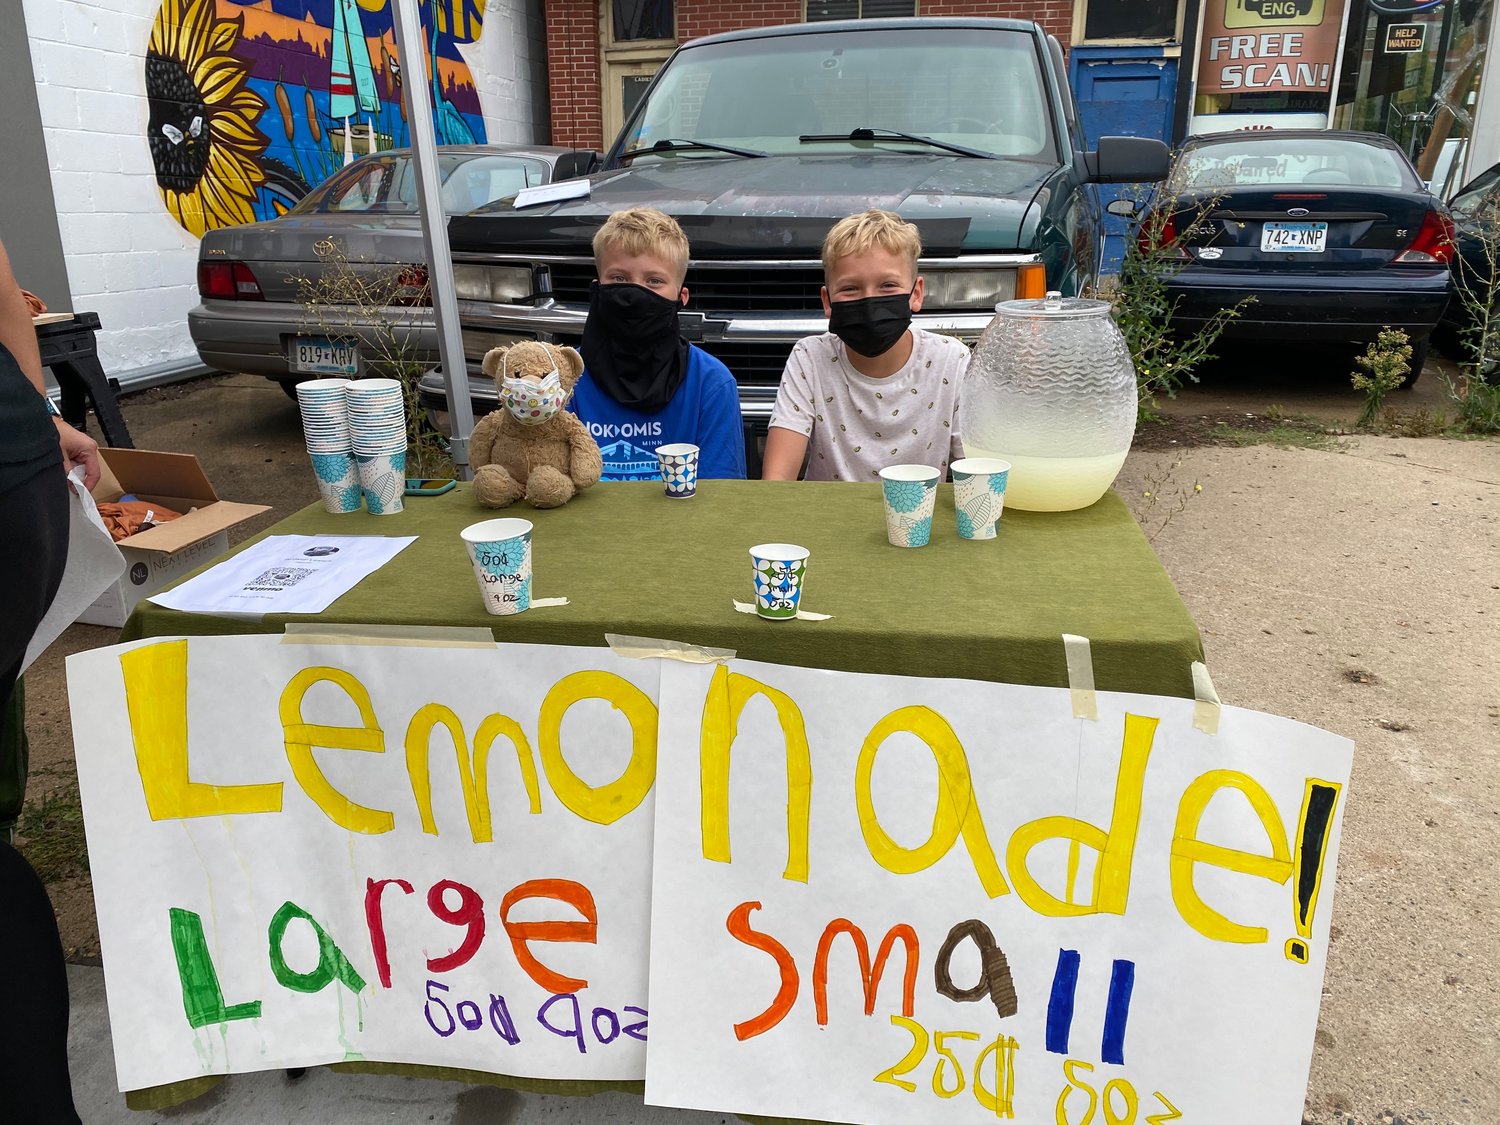 Ben Lanners and Fen McCoy sold lemonade outside The Workshop during Crazy Days to earn money - Ben for an upcoming vacation and Fen for cameras so he can build his YouTube Channel (now SpiderBros, switching to Moongate Gaming soon).